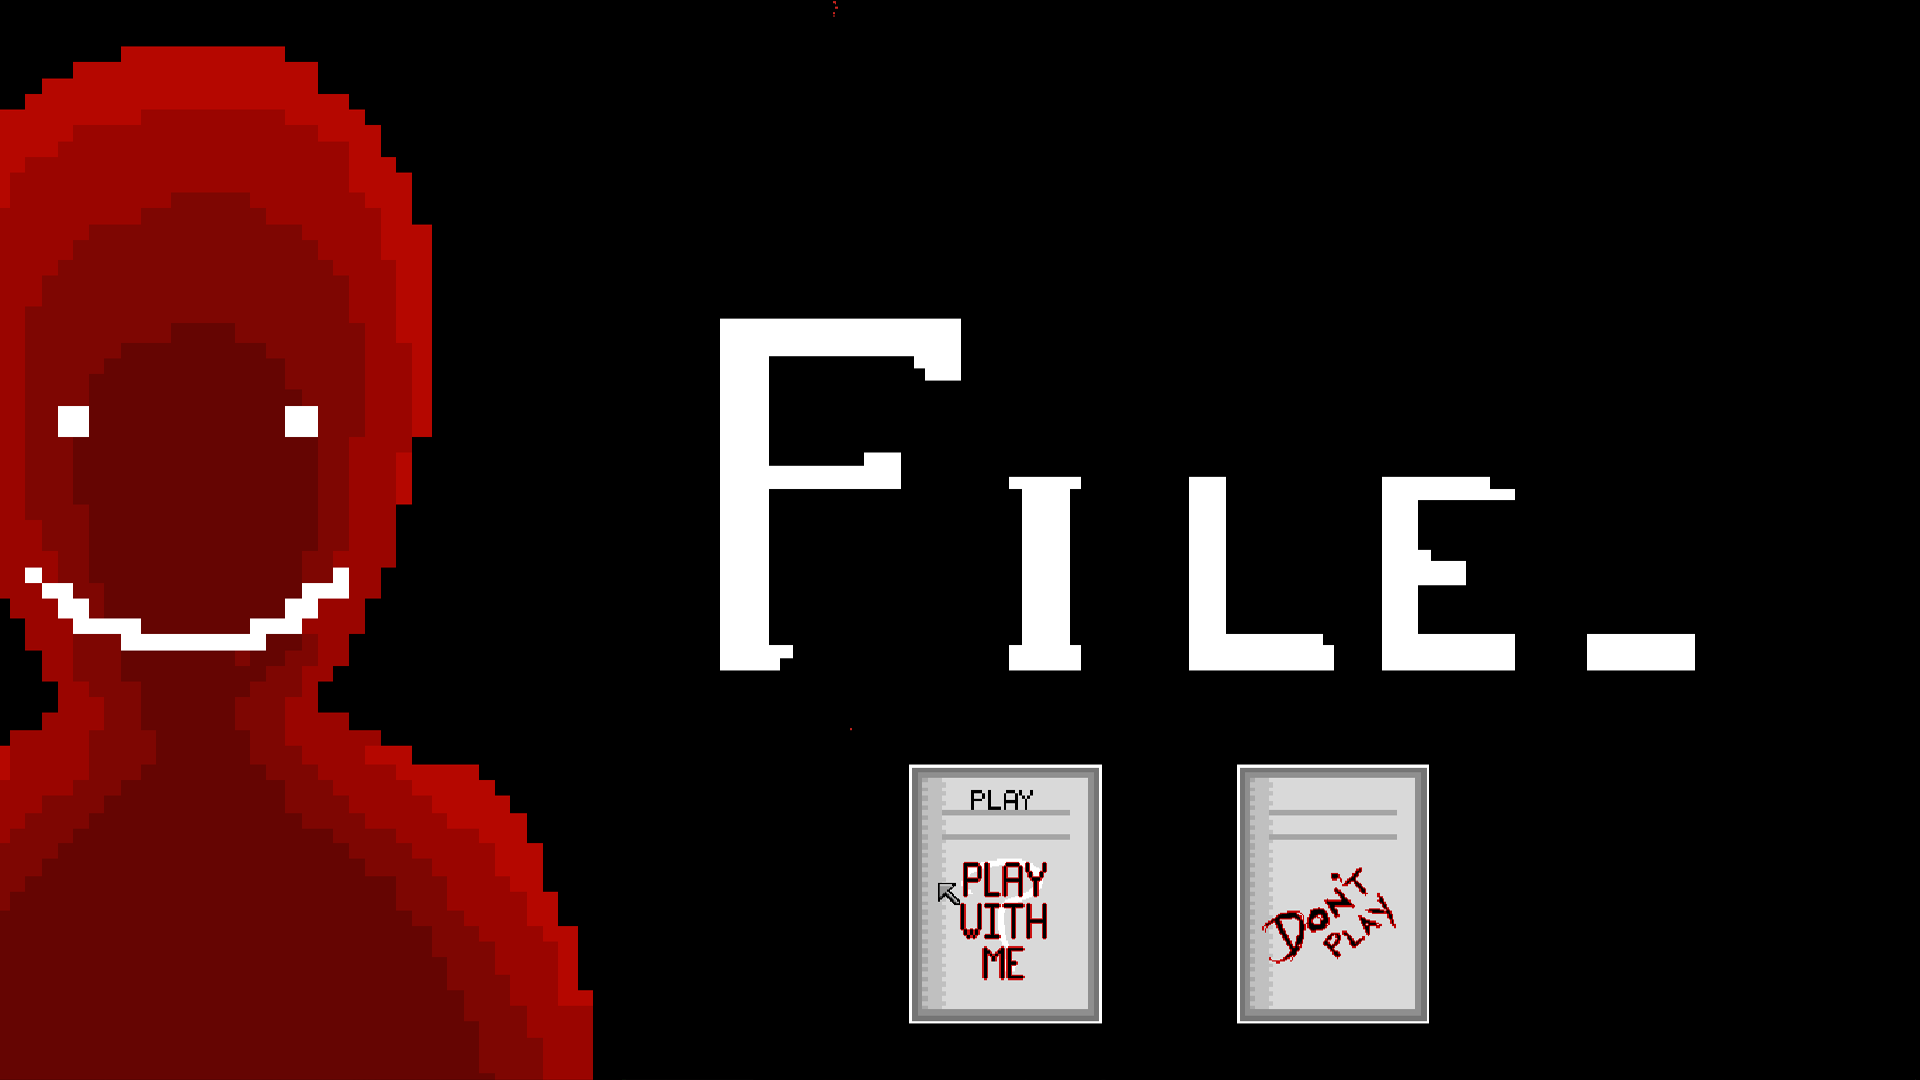 Exe файл. Картинка exe файла. File.exe игра. Game html file game